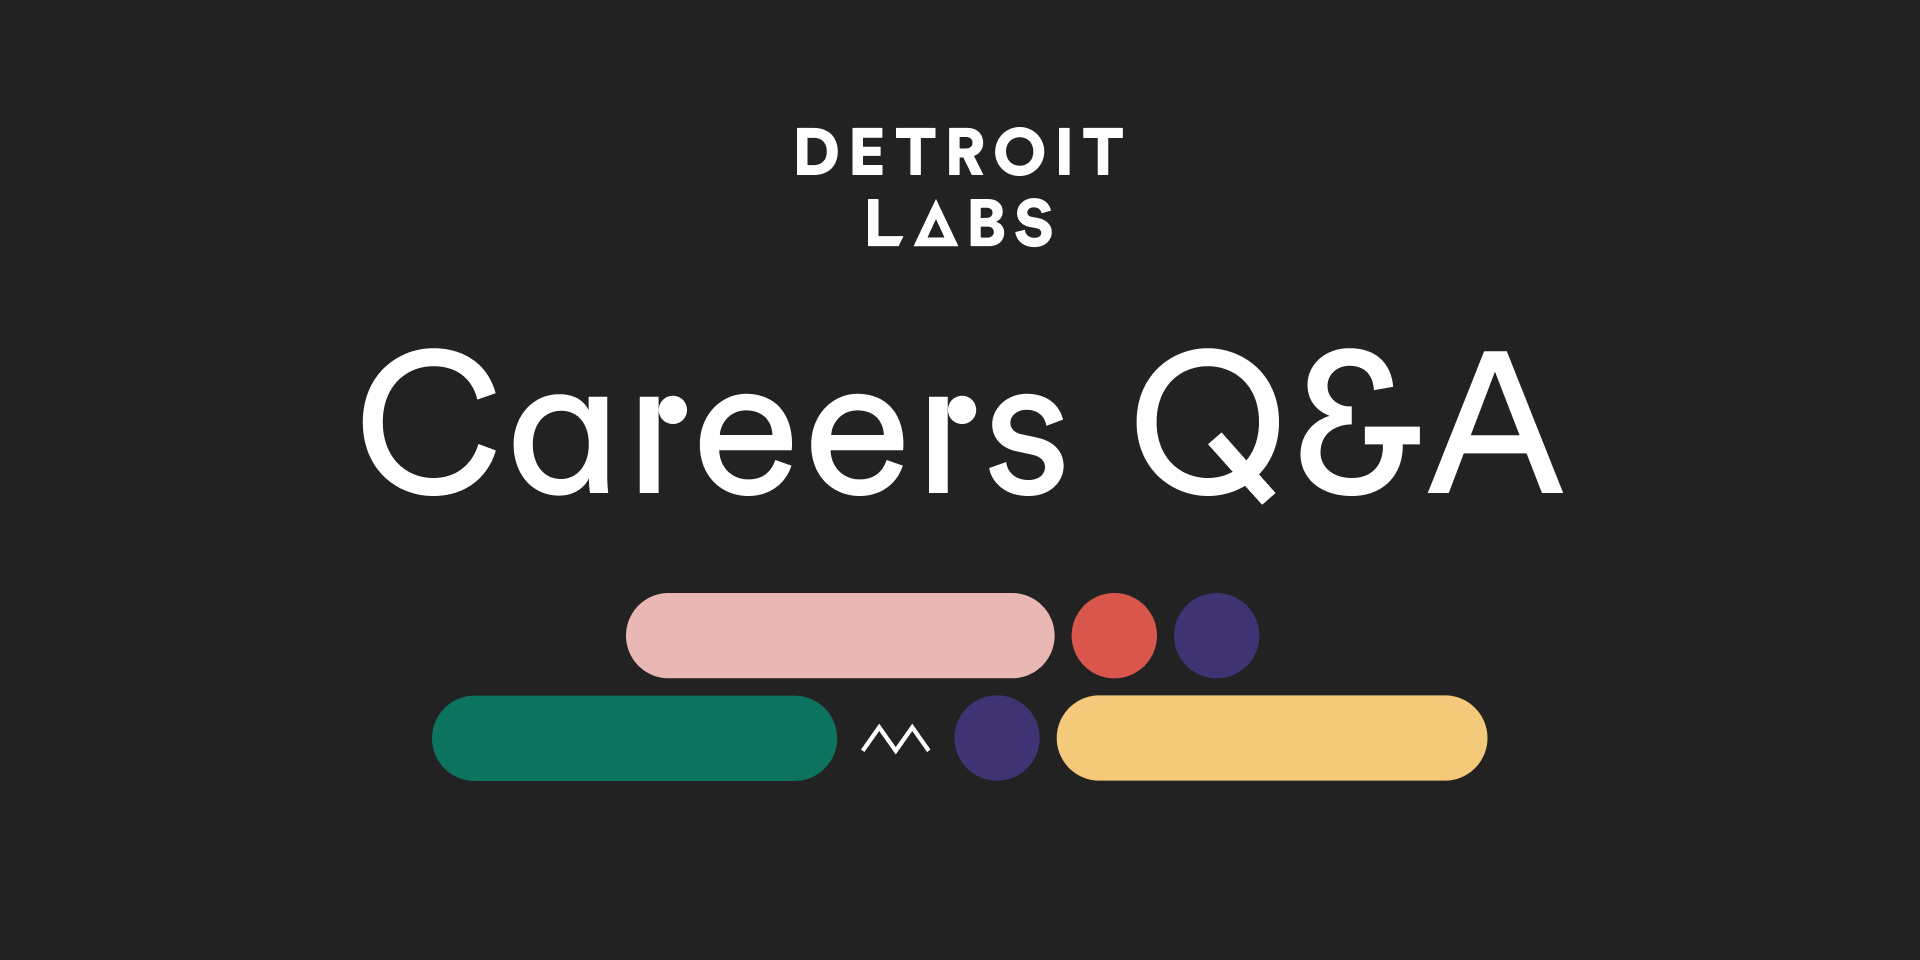 Careers Q&A panel text image with brand elements with colors.